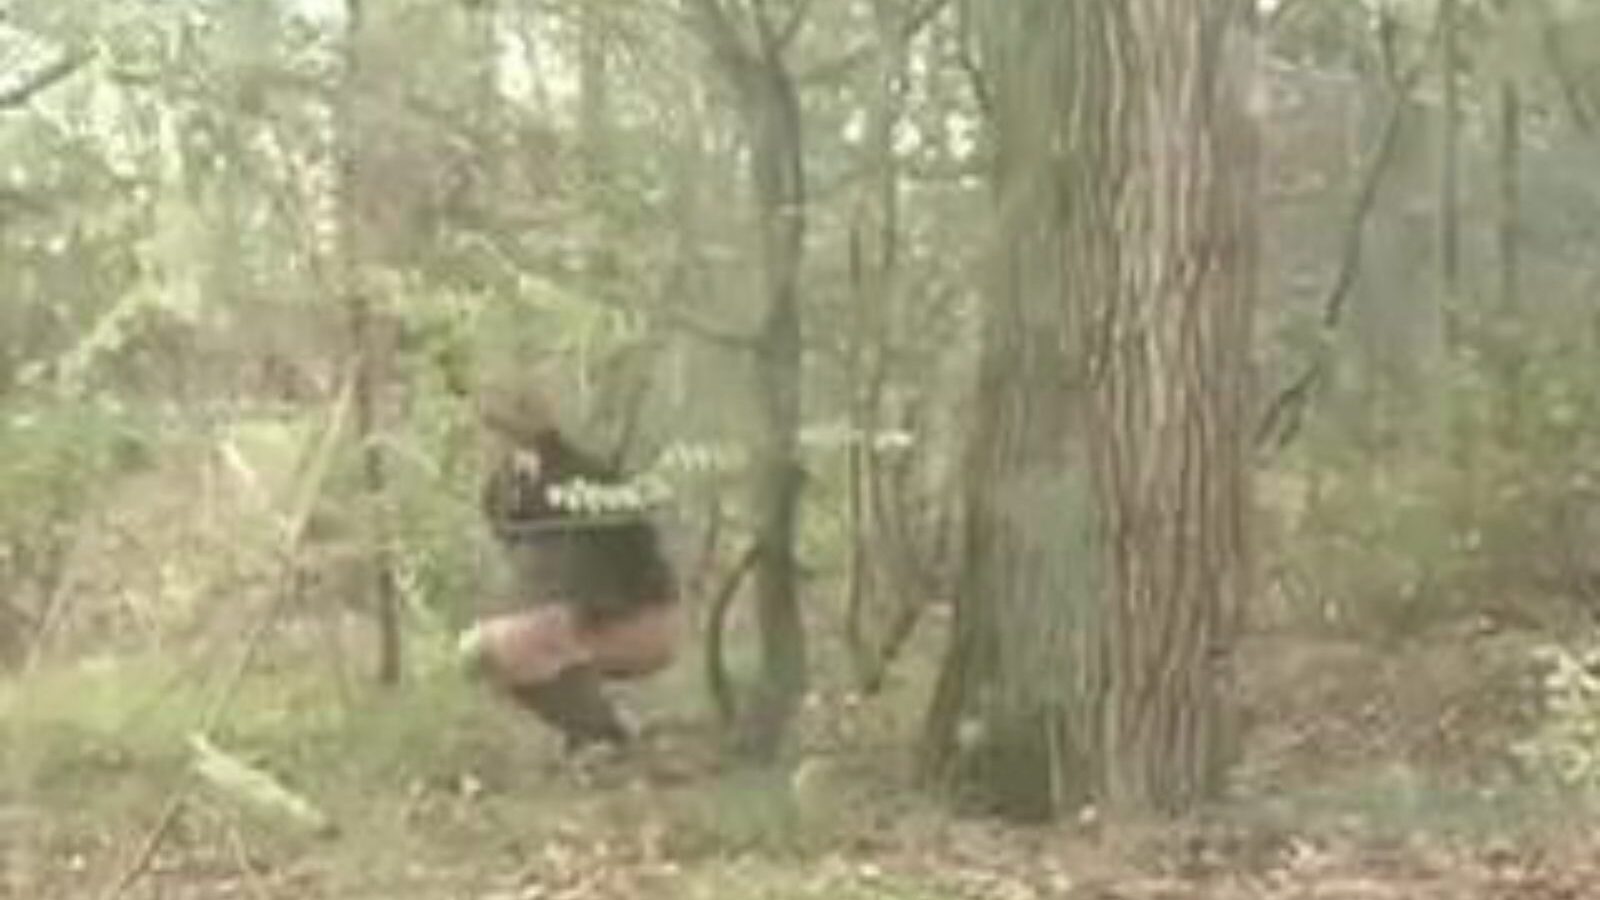 Fucking in the Woods: Free Twitter Porn Episode f1 - xHamster See Pumping in the Woods tube orgy video for free on xHamster, with the domineering bevy of Twitter In Vimeo & Xxx in Youtube porn movie vignettes